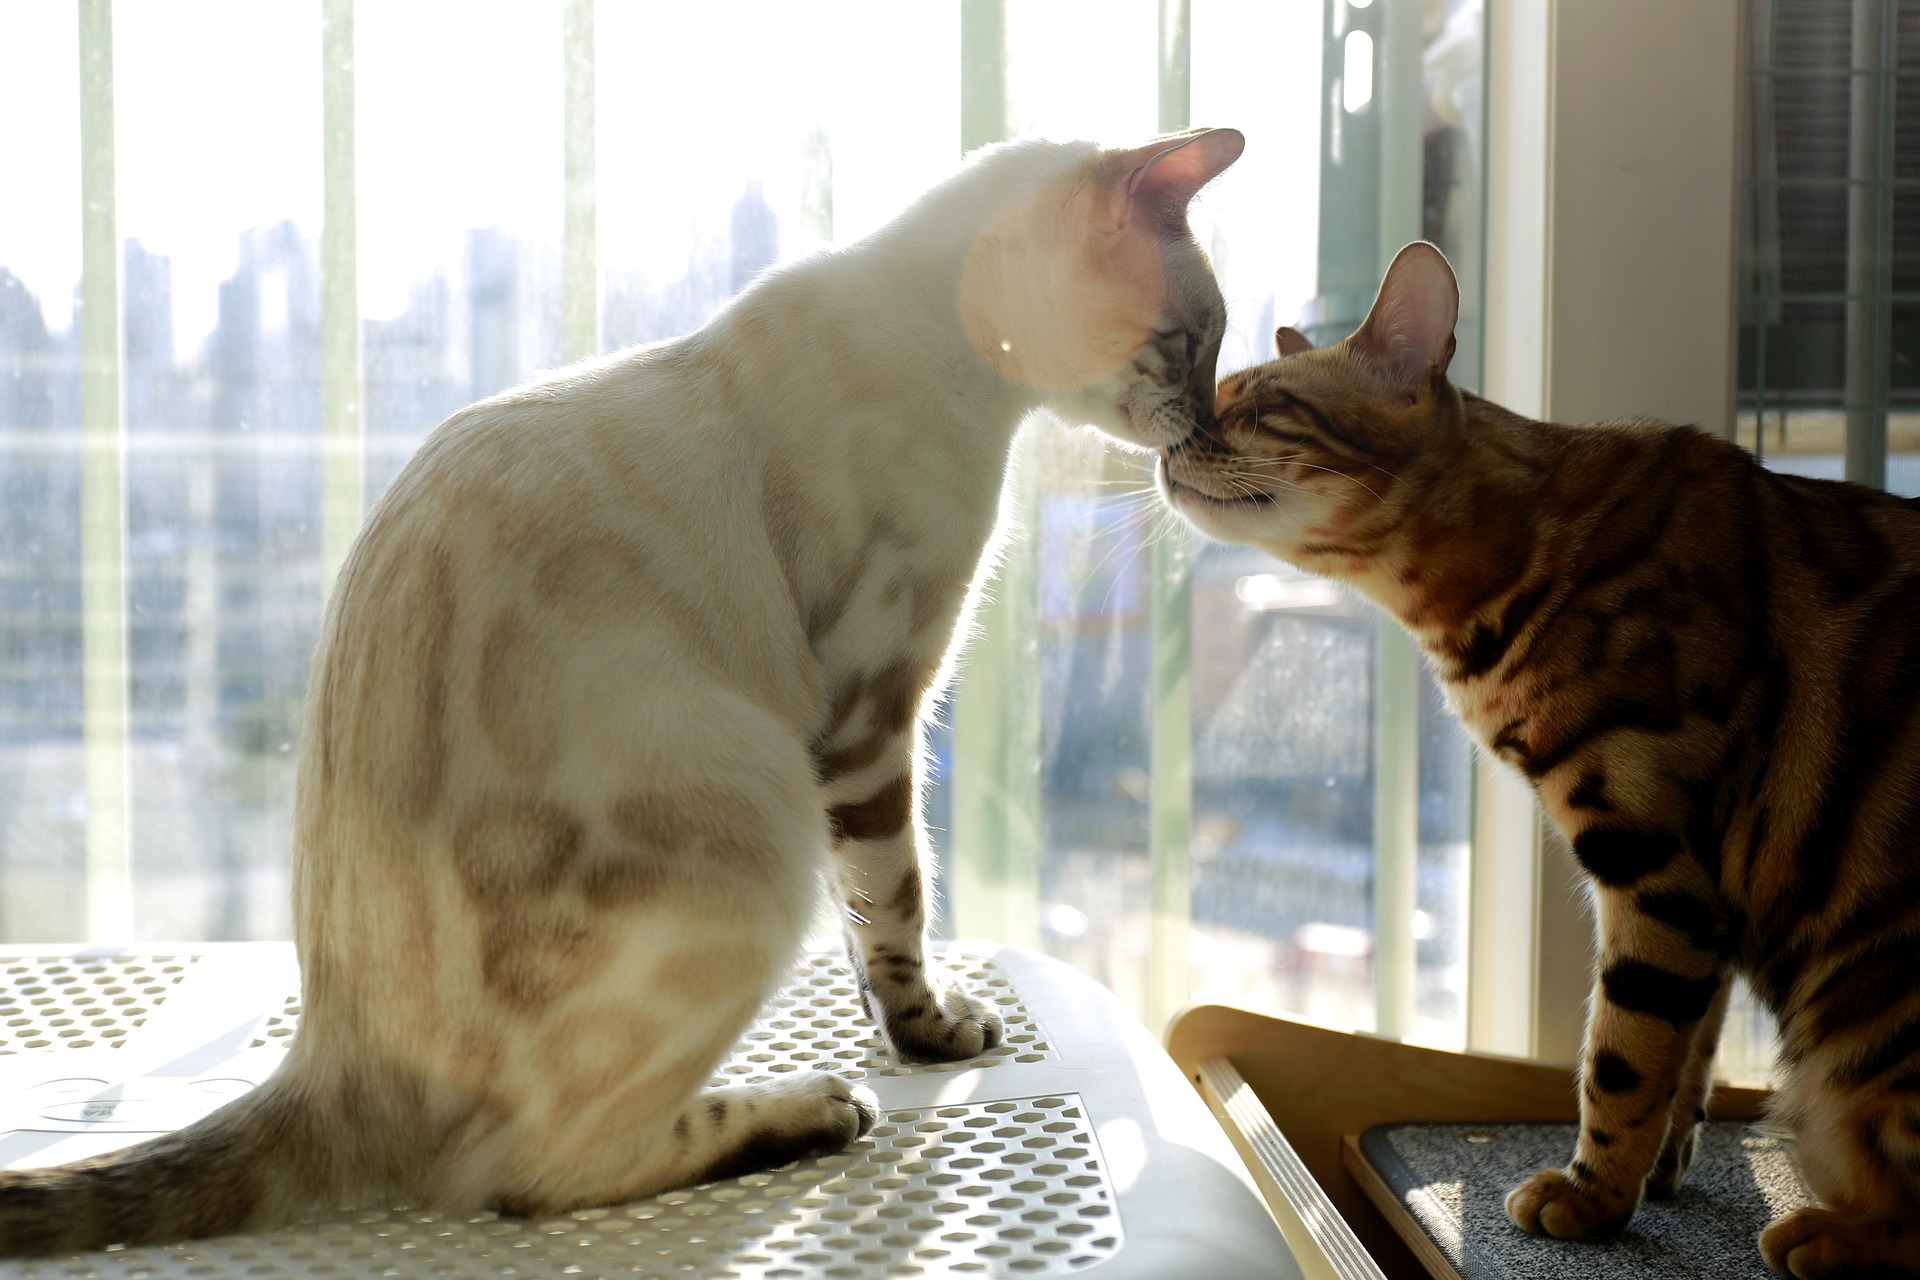 Snow Bengal Cat toching noses with another bengal cat sitting near a window